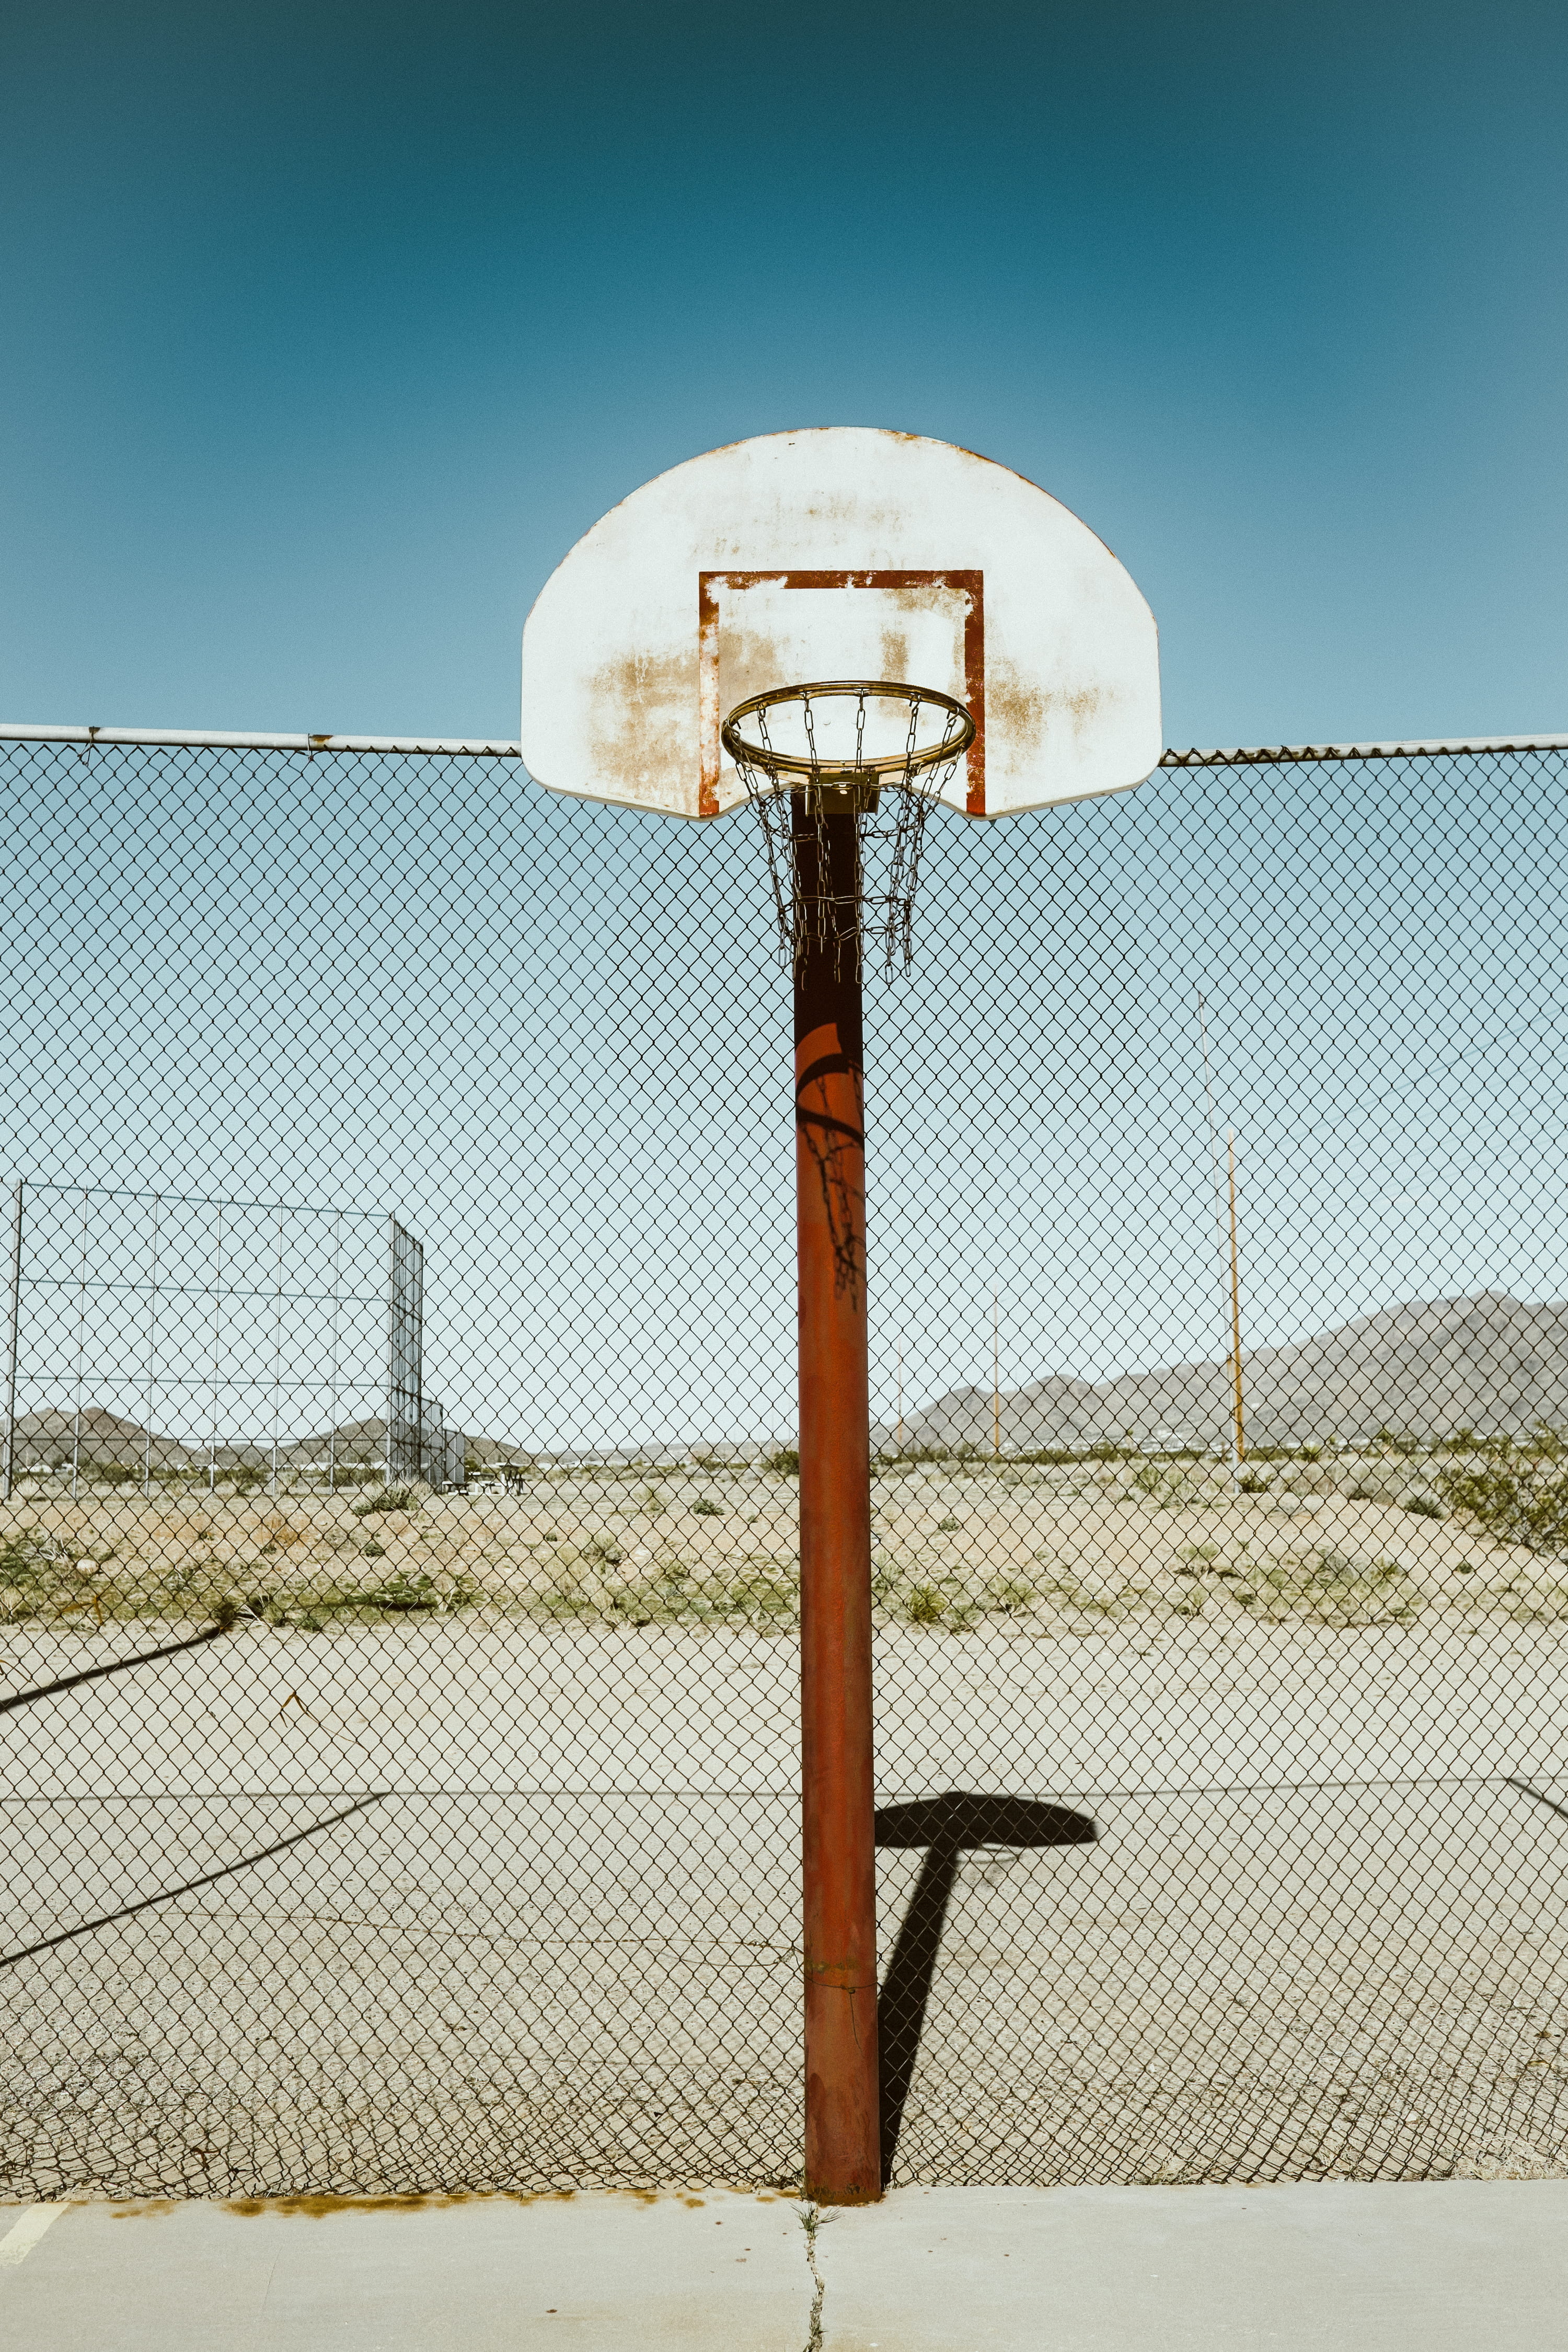 white and brown basketball hoop, portable basketball near chain link fence